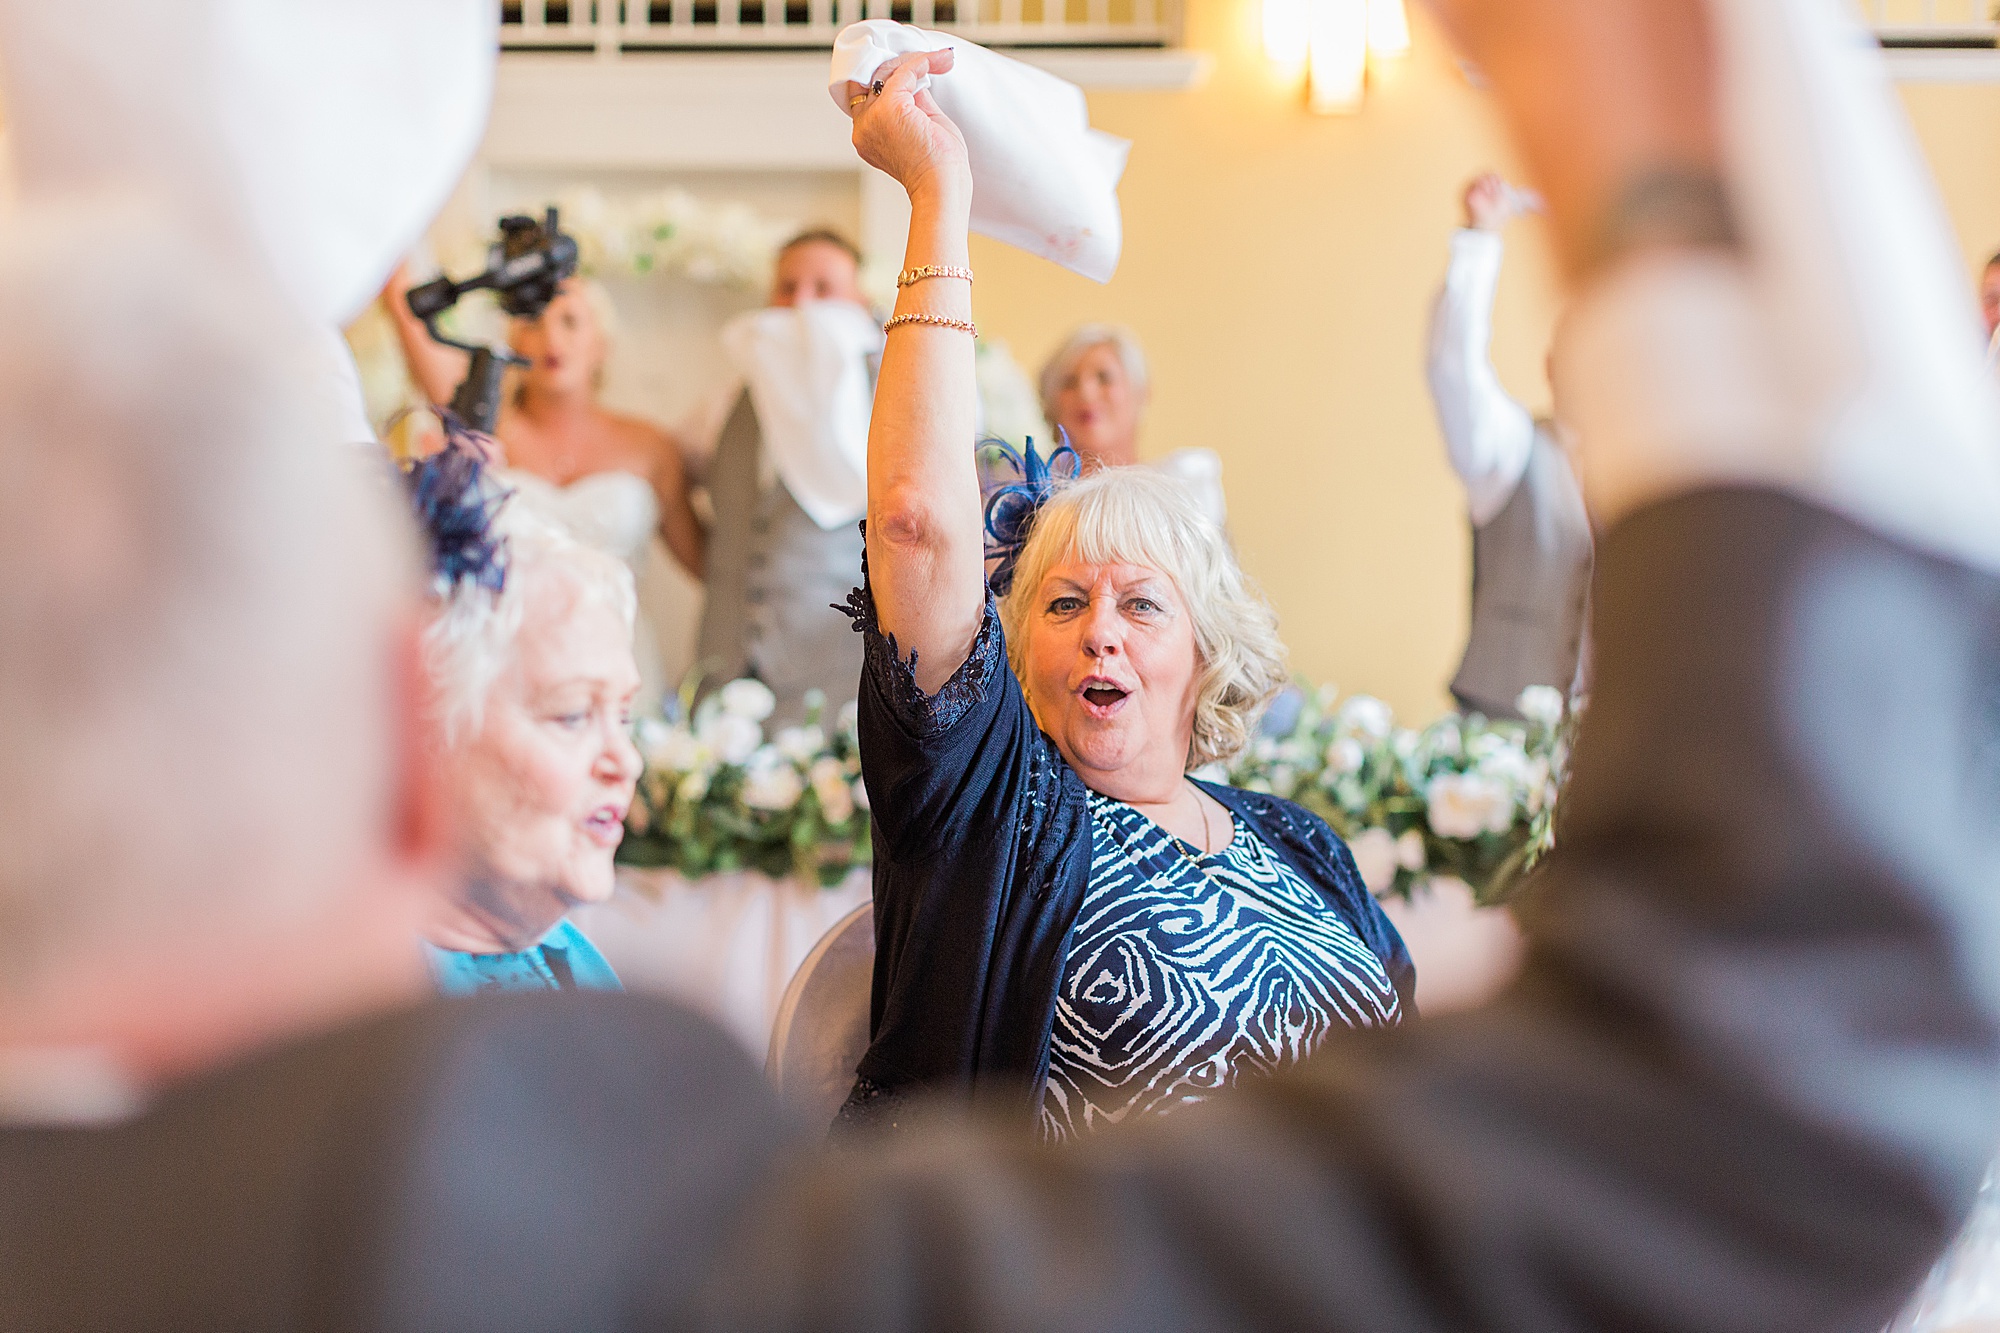 wedding guest swinging her napkin in the airs cheering and singing/dancing to singing waiters at a wedding reception - image shows so much fun and enjoyment